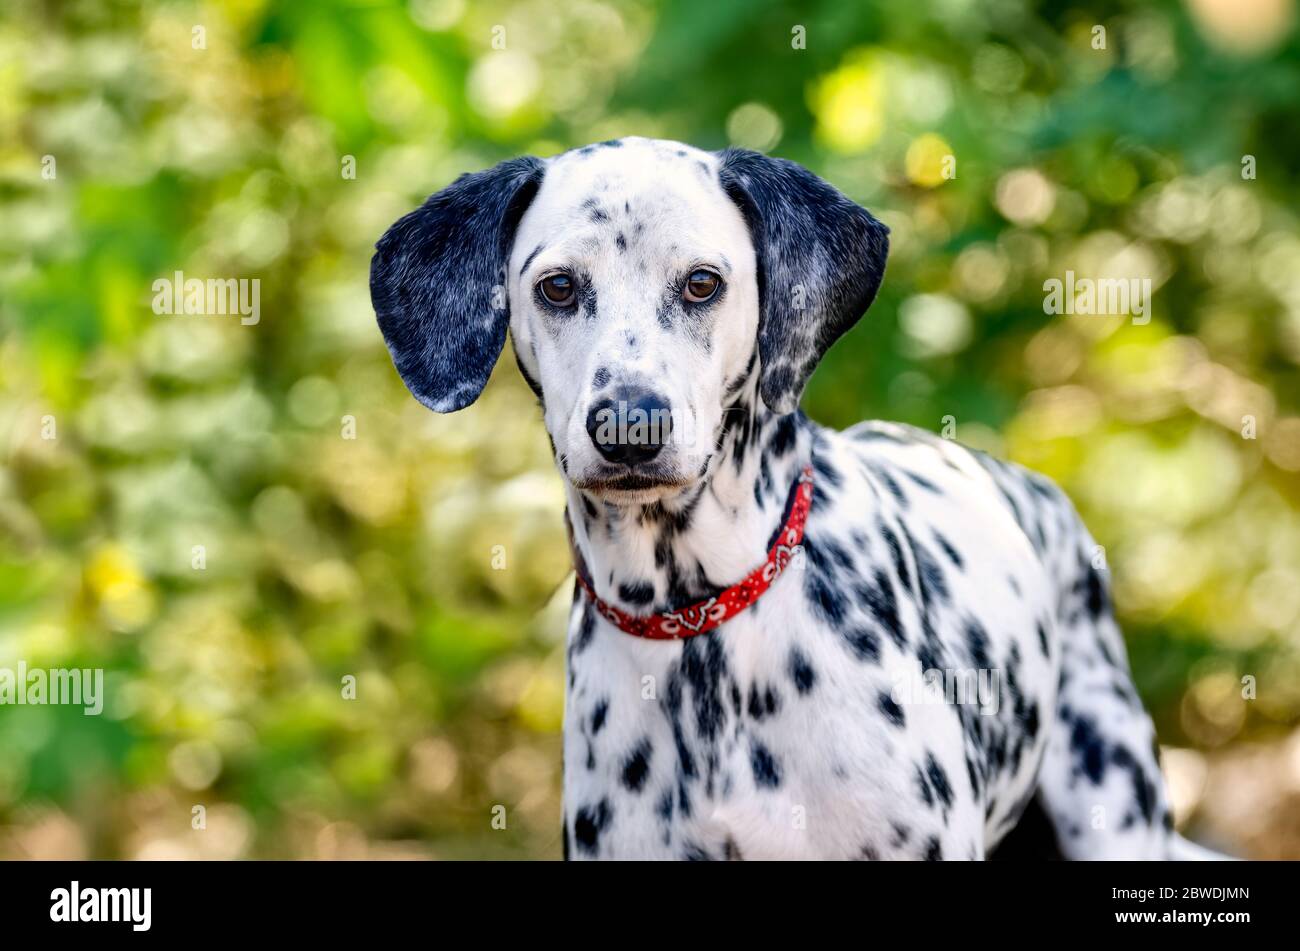 A Dalmatian Purebred is Outside Looking Straight at the Camera Stock Photo